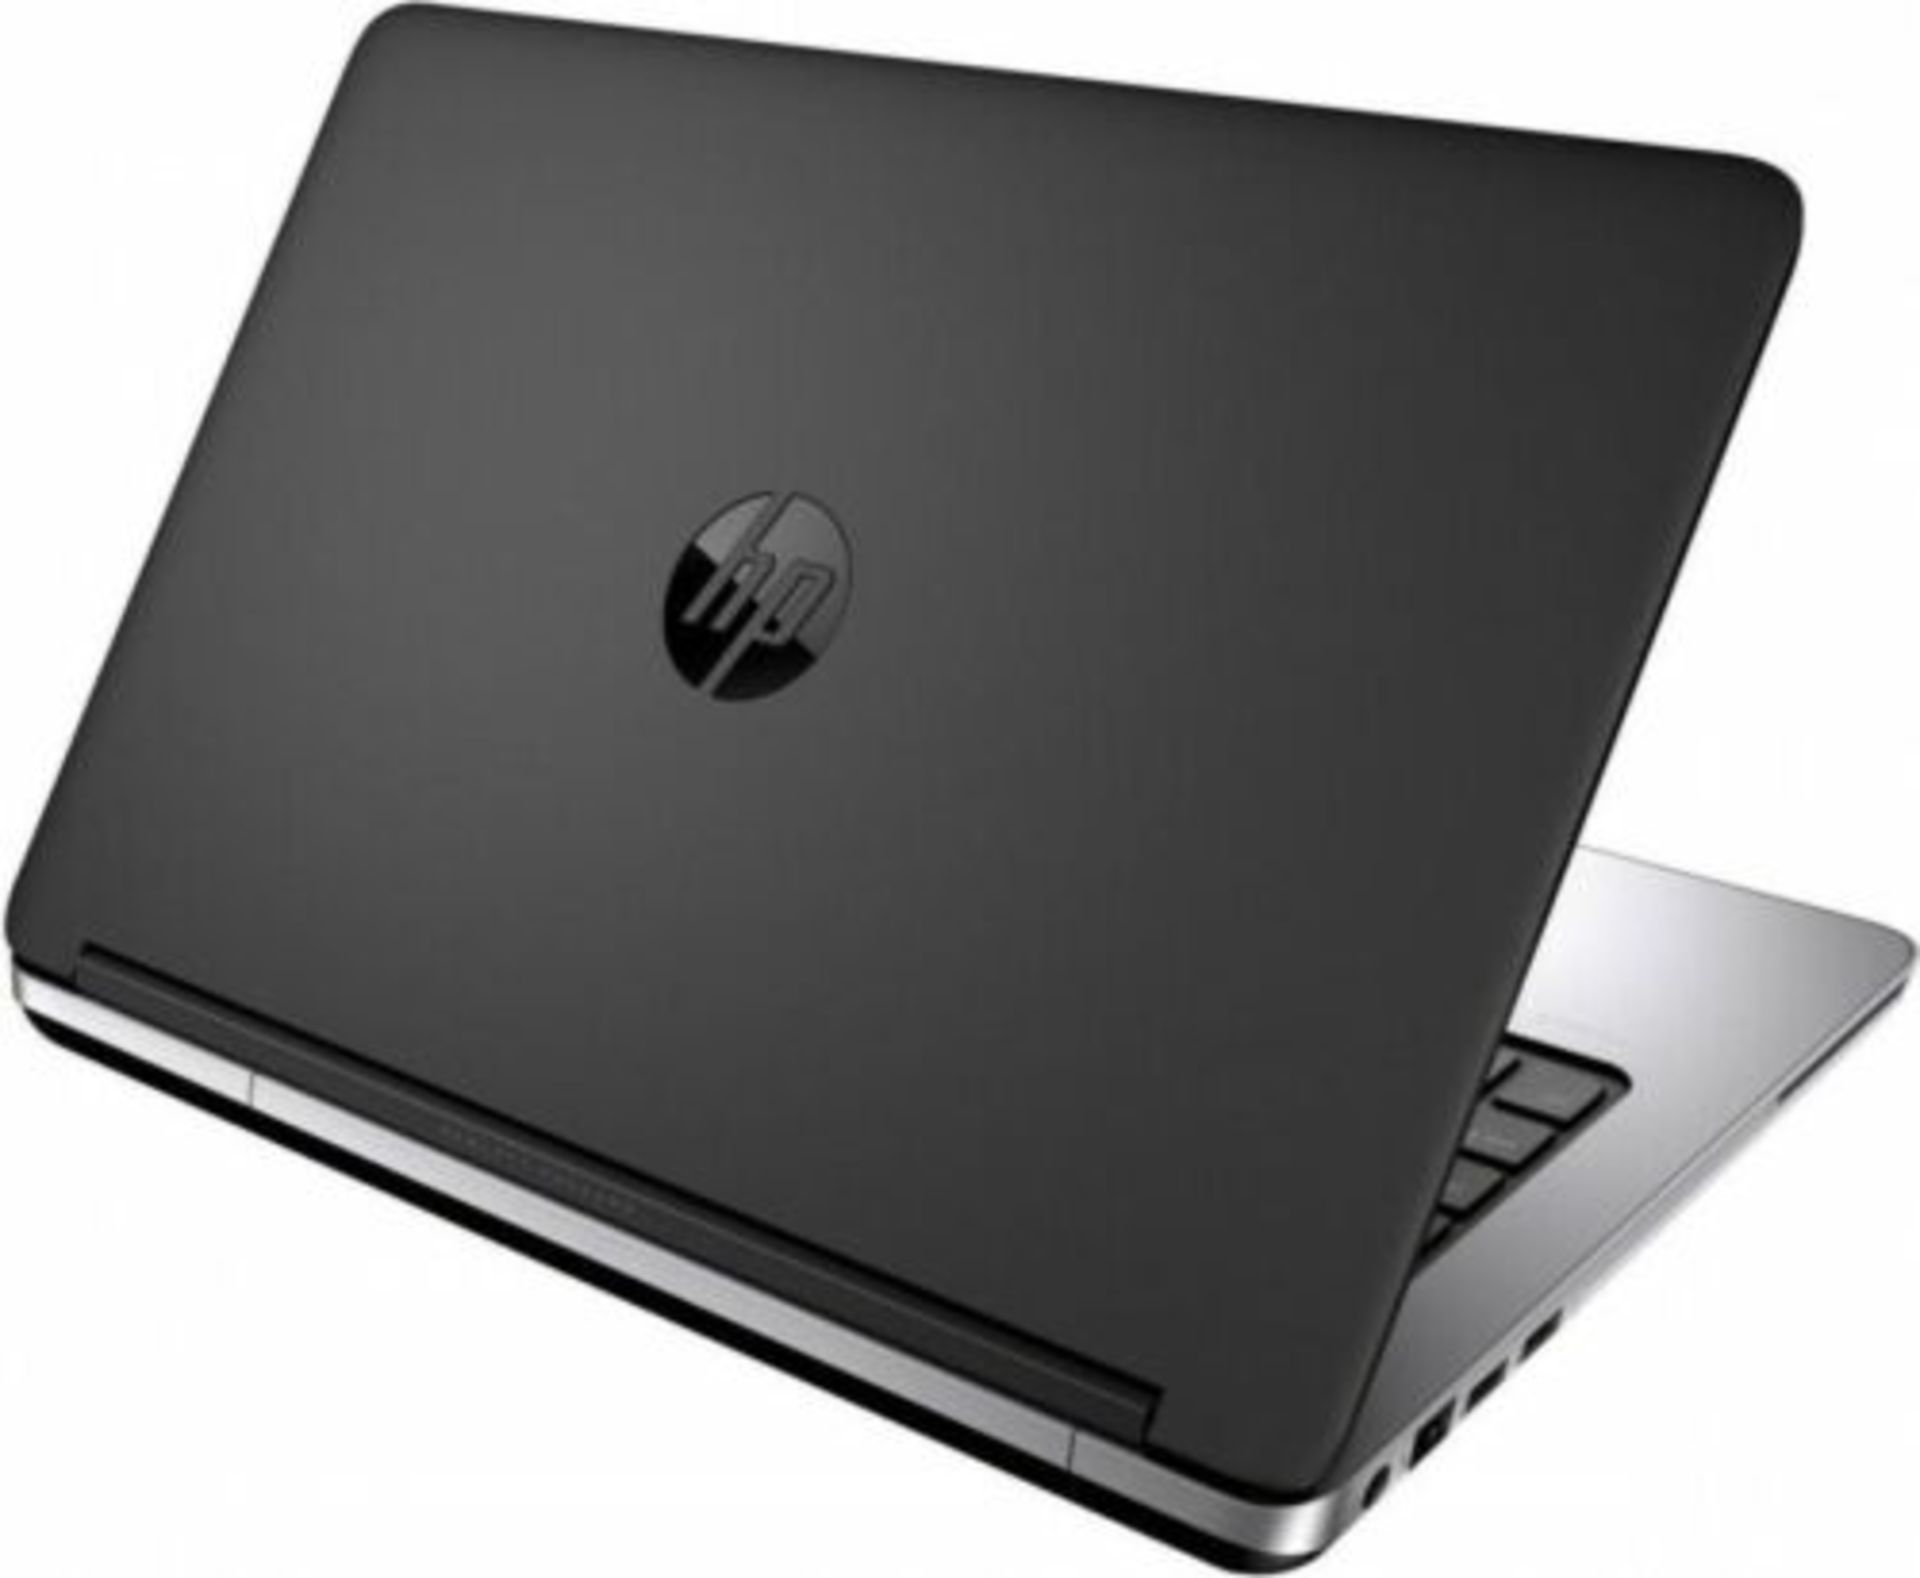 HP PROBOOK, 14", 2.7 GHZ, AMD A6 PROCESSOR, 4GB RAM, 300GB HDD, (DELIVERY ONLY AT £10 PLUS VAT) 90 - Image 2 of 3